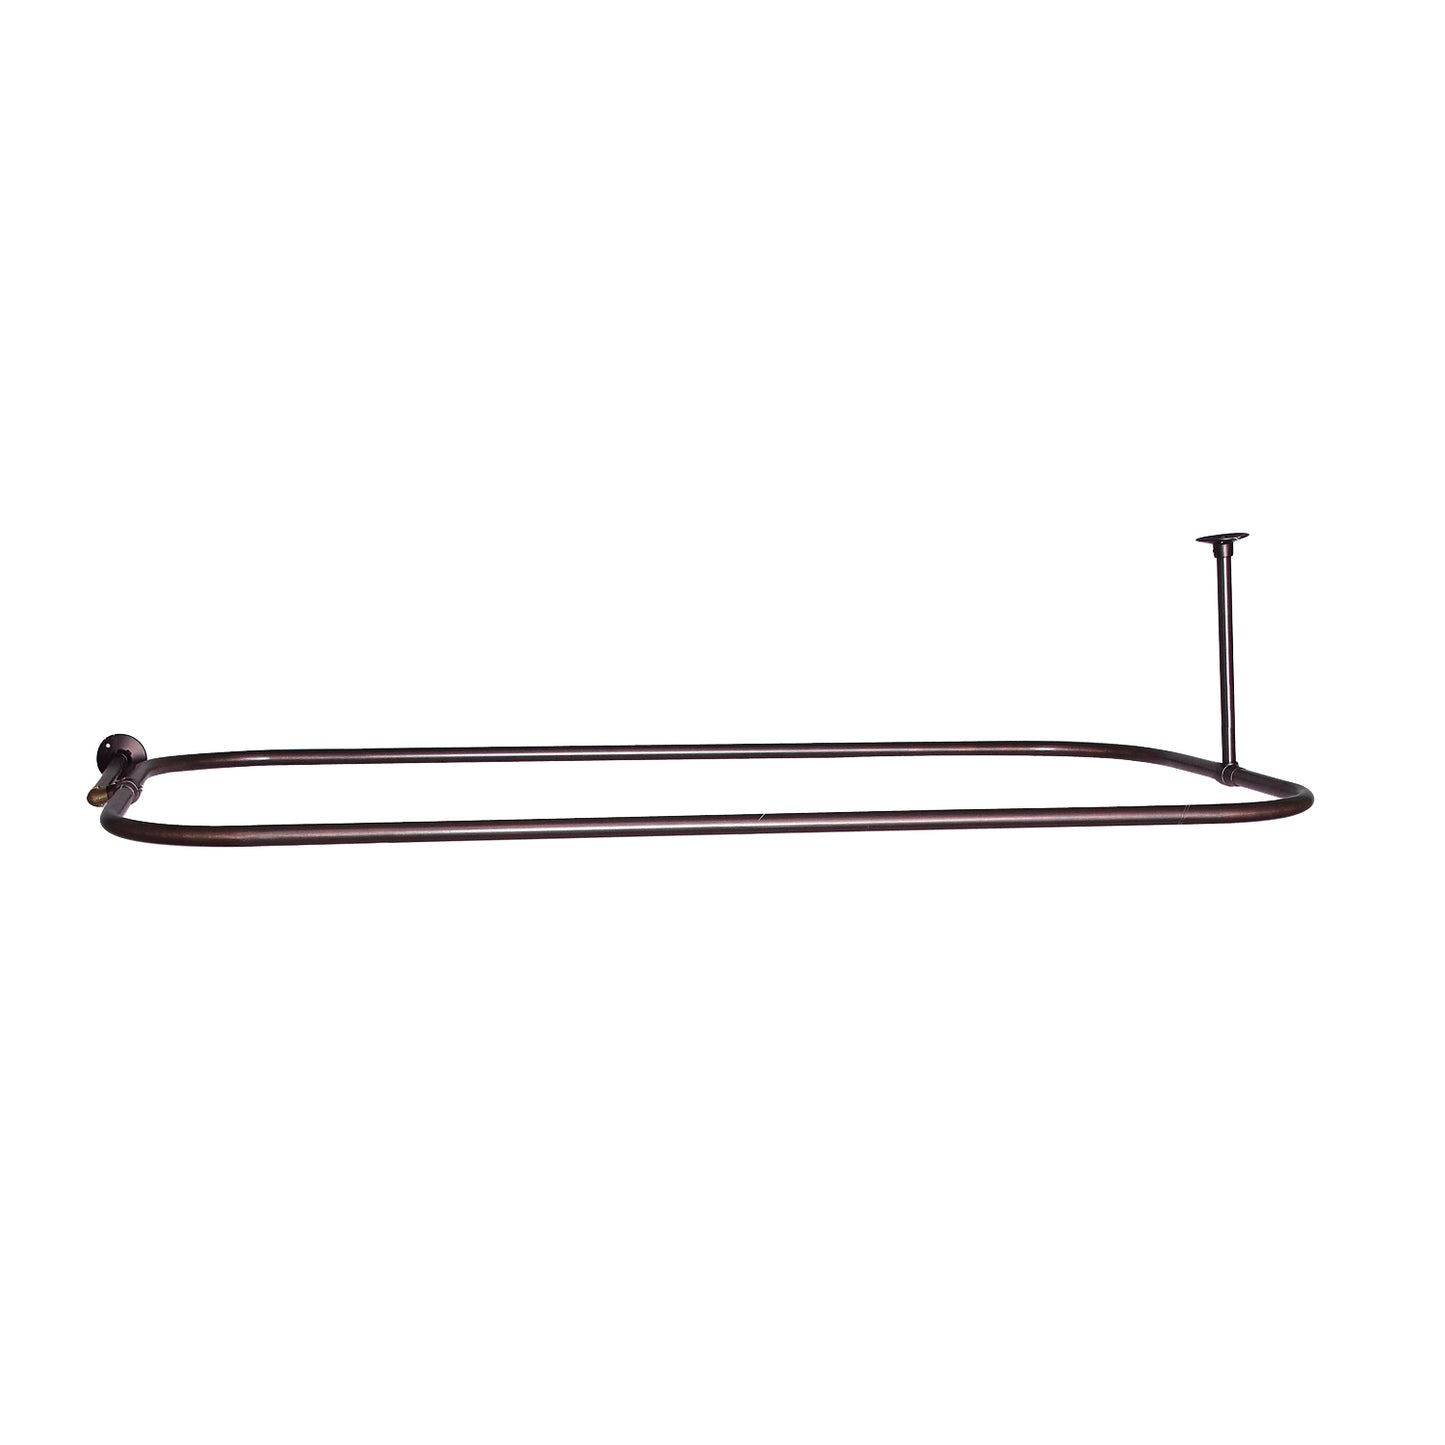 Rectangular Shower Rod w/Side Wall Support in 48 x 24" in ORB